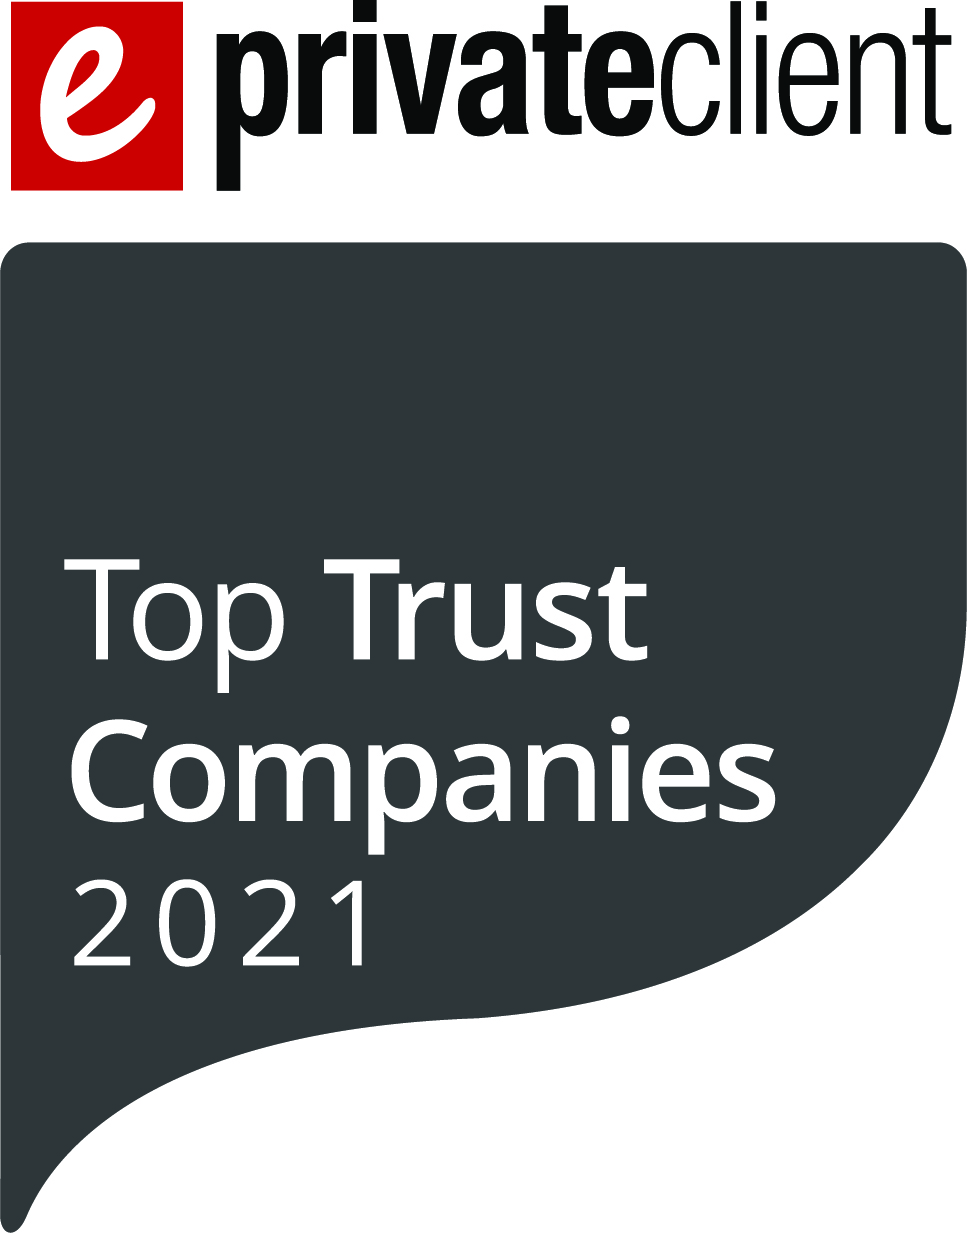 EXCLUSIVE: 2021 eprivateclient Top Trust Companies revealed